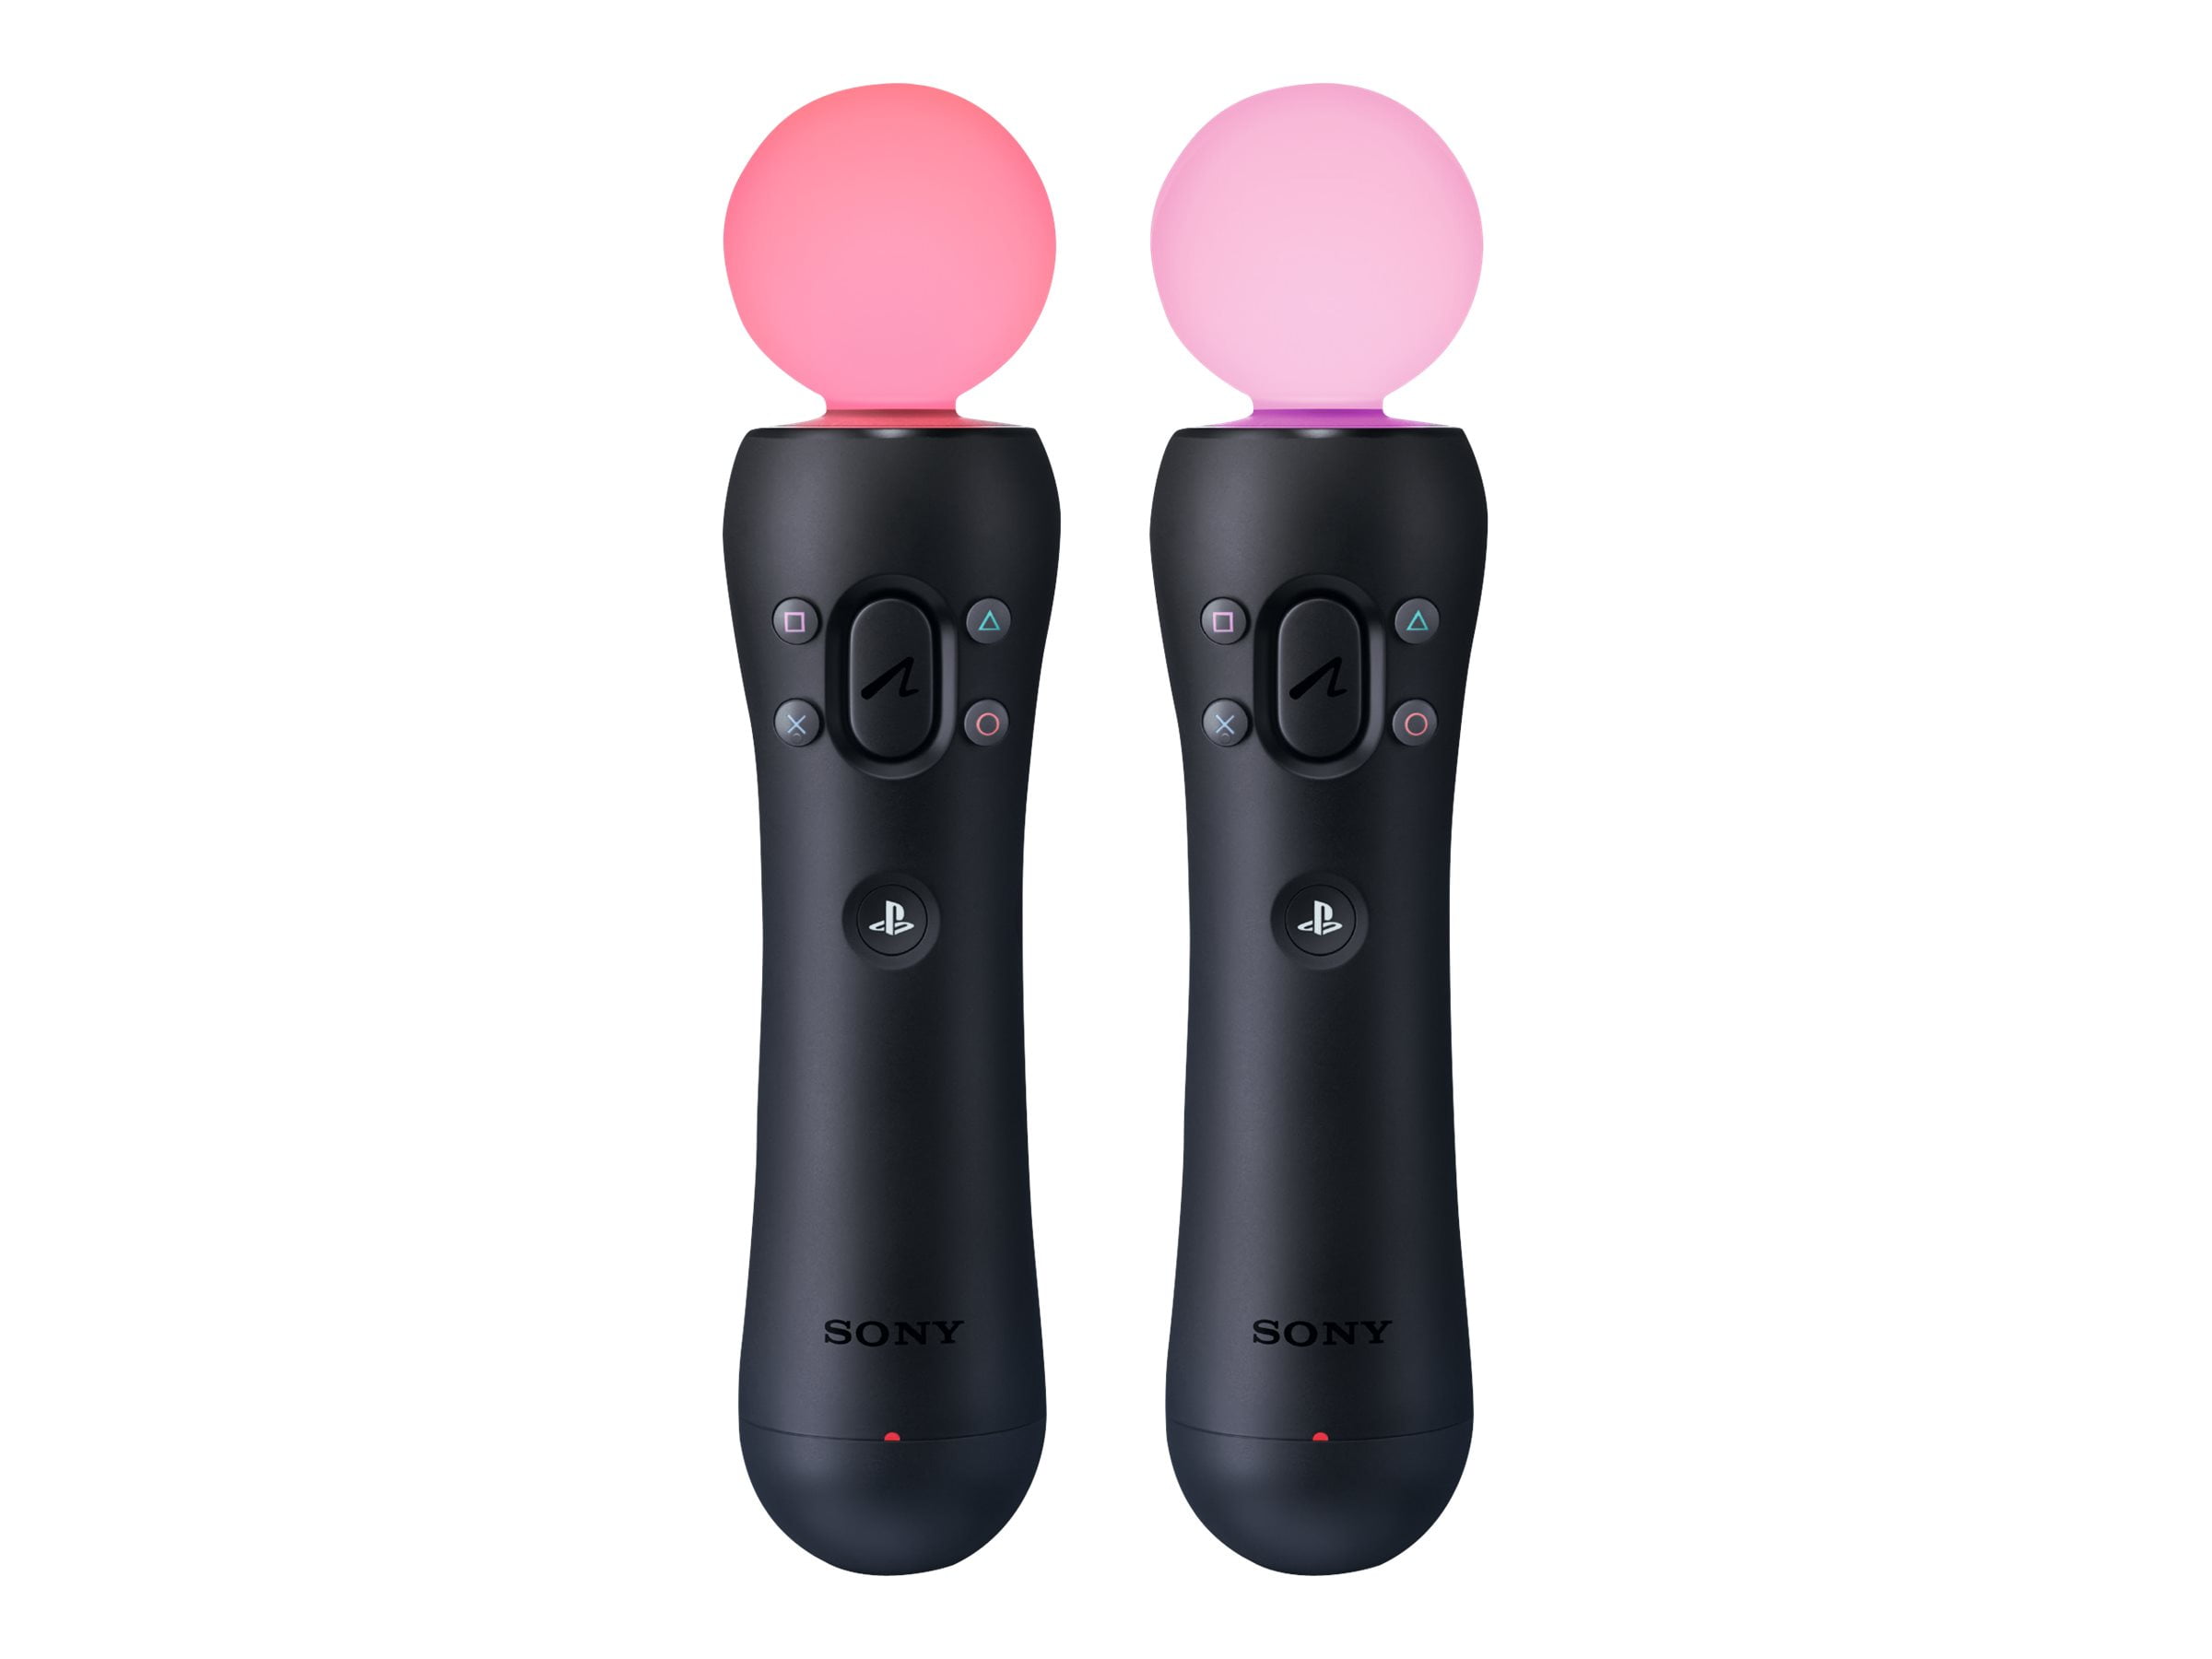 Restored Sony PlayStation Move Controller Lot Of 2 PCS Black For PlayStation 4 Micro USB Model PS4 (Refurbished) - Walmart.com